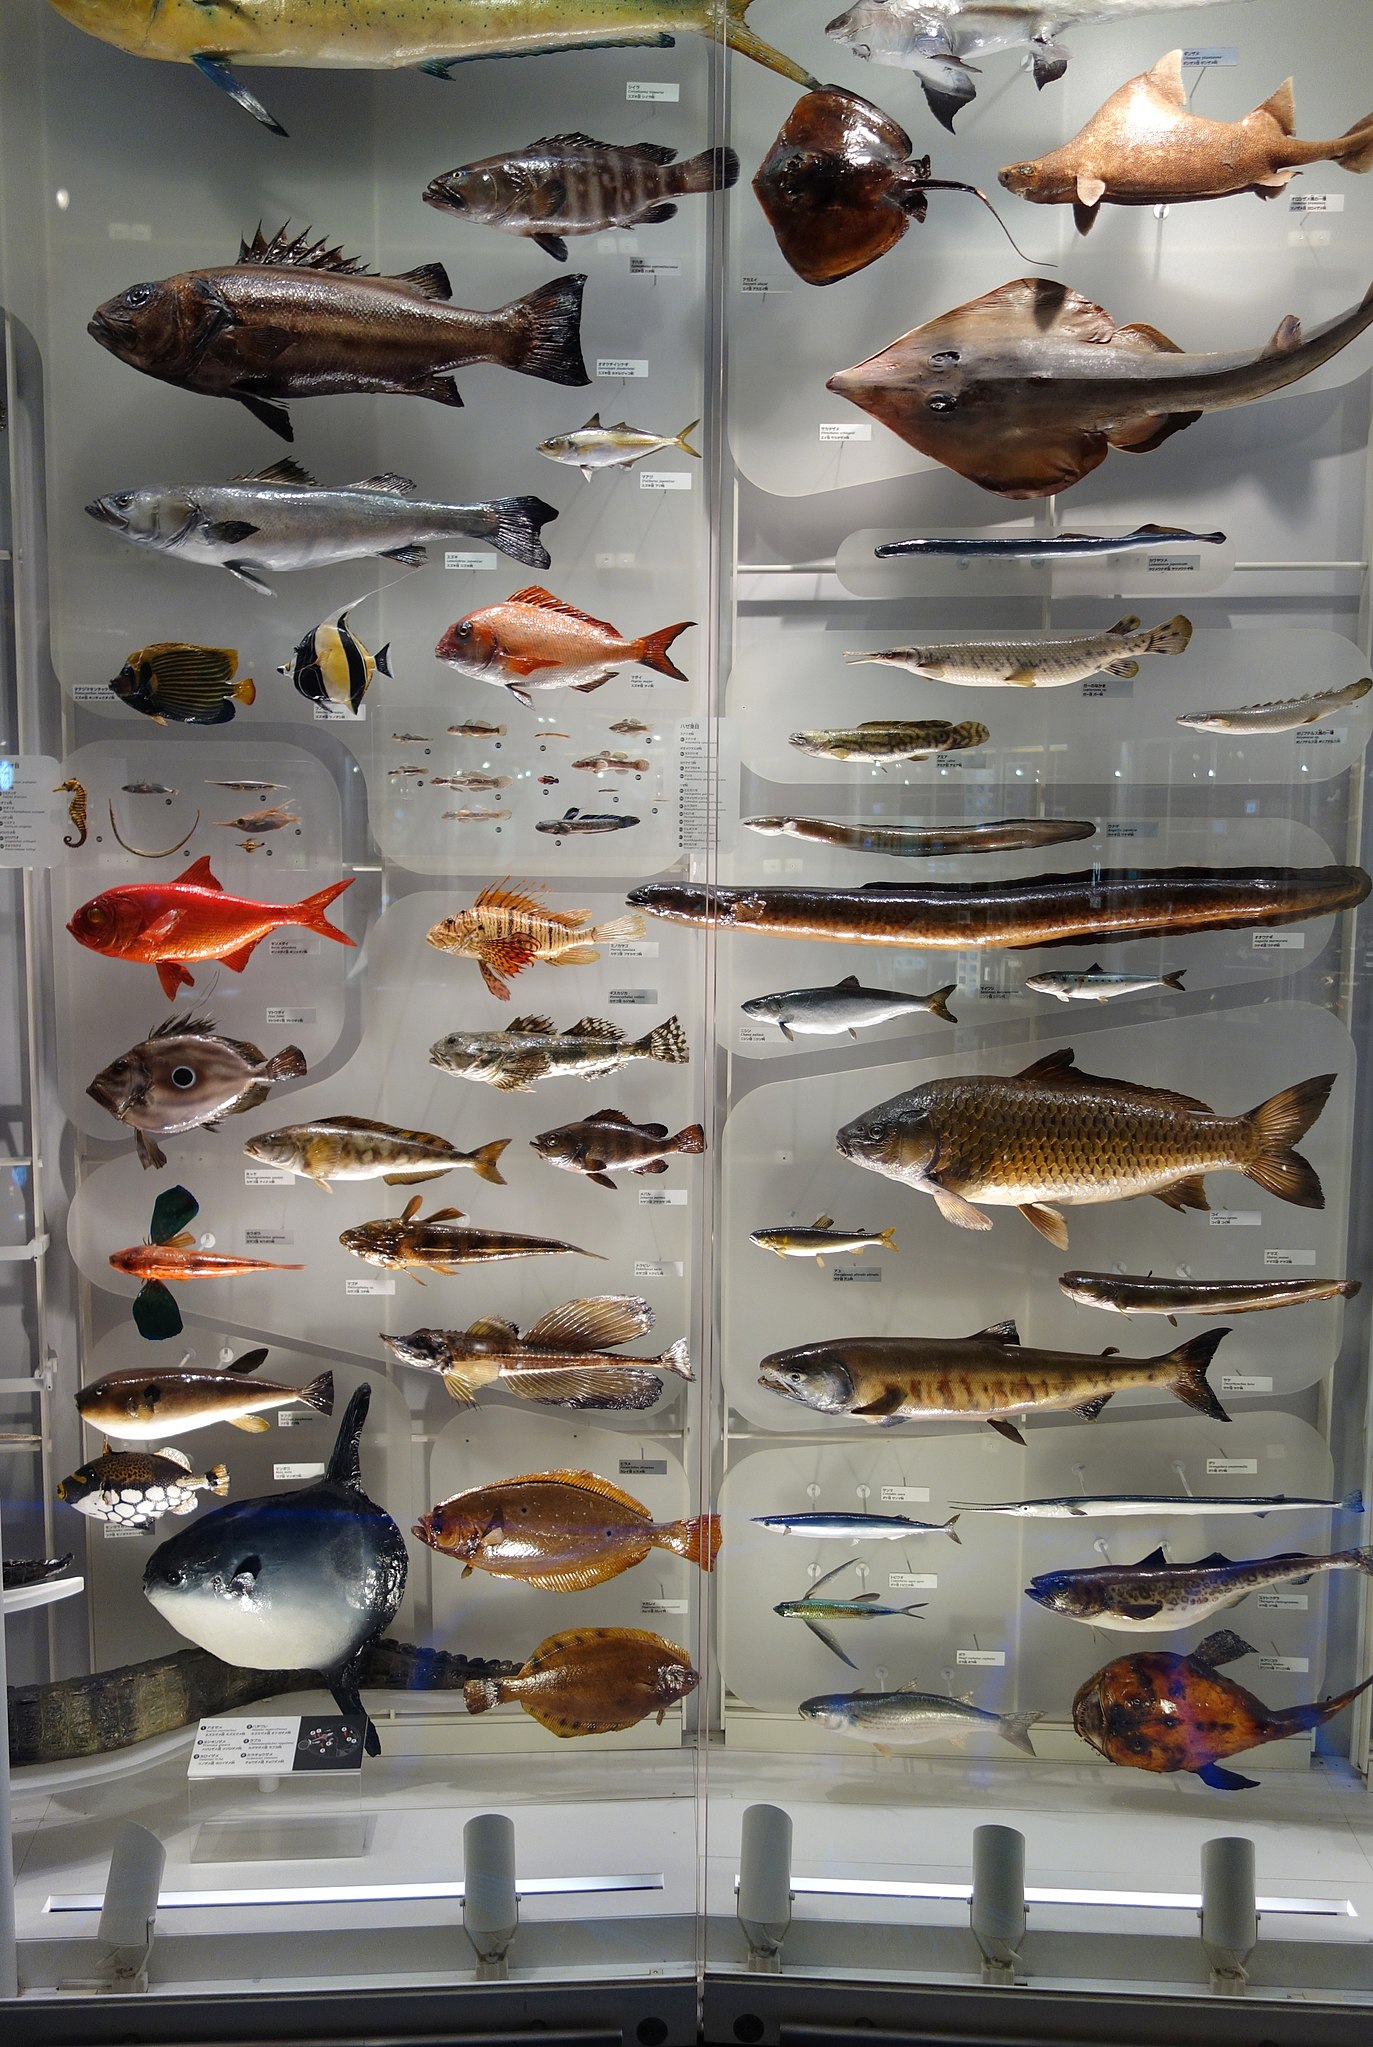 1373px-Fish_display_-_National_Museum_of_Nature_and_Science%2C_Tokyo_-_DSC07536.JPG